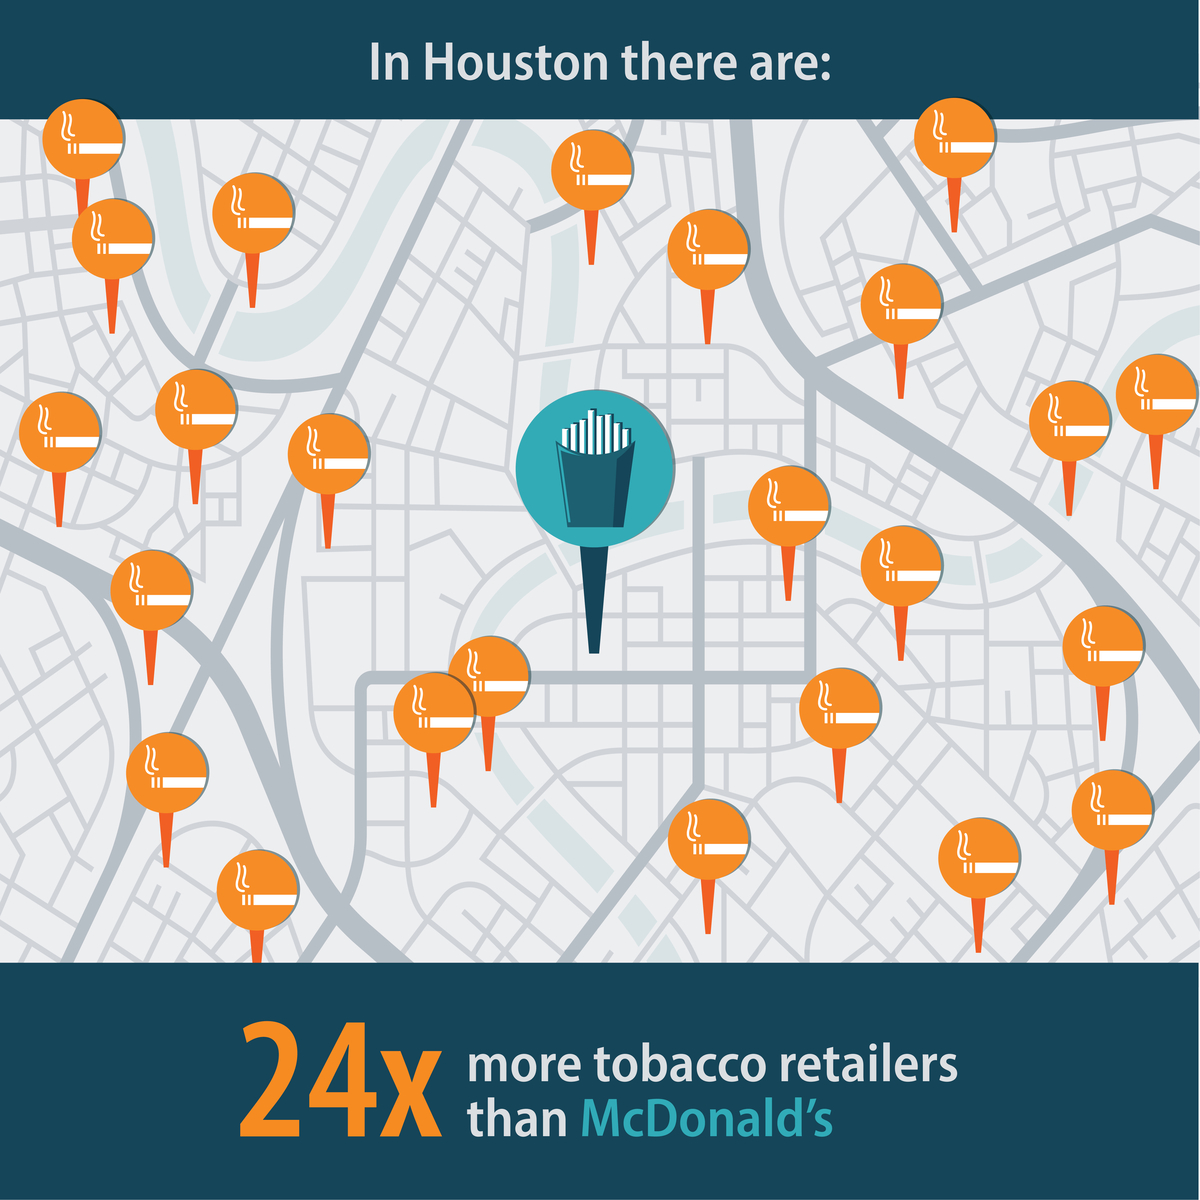 In Houston there are: 24 times more tobacco retailers than McDonald's